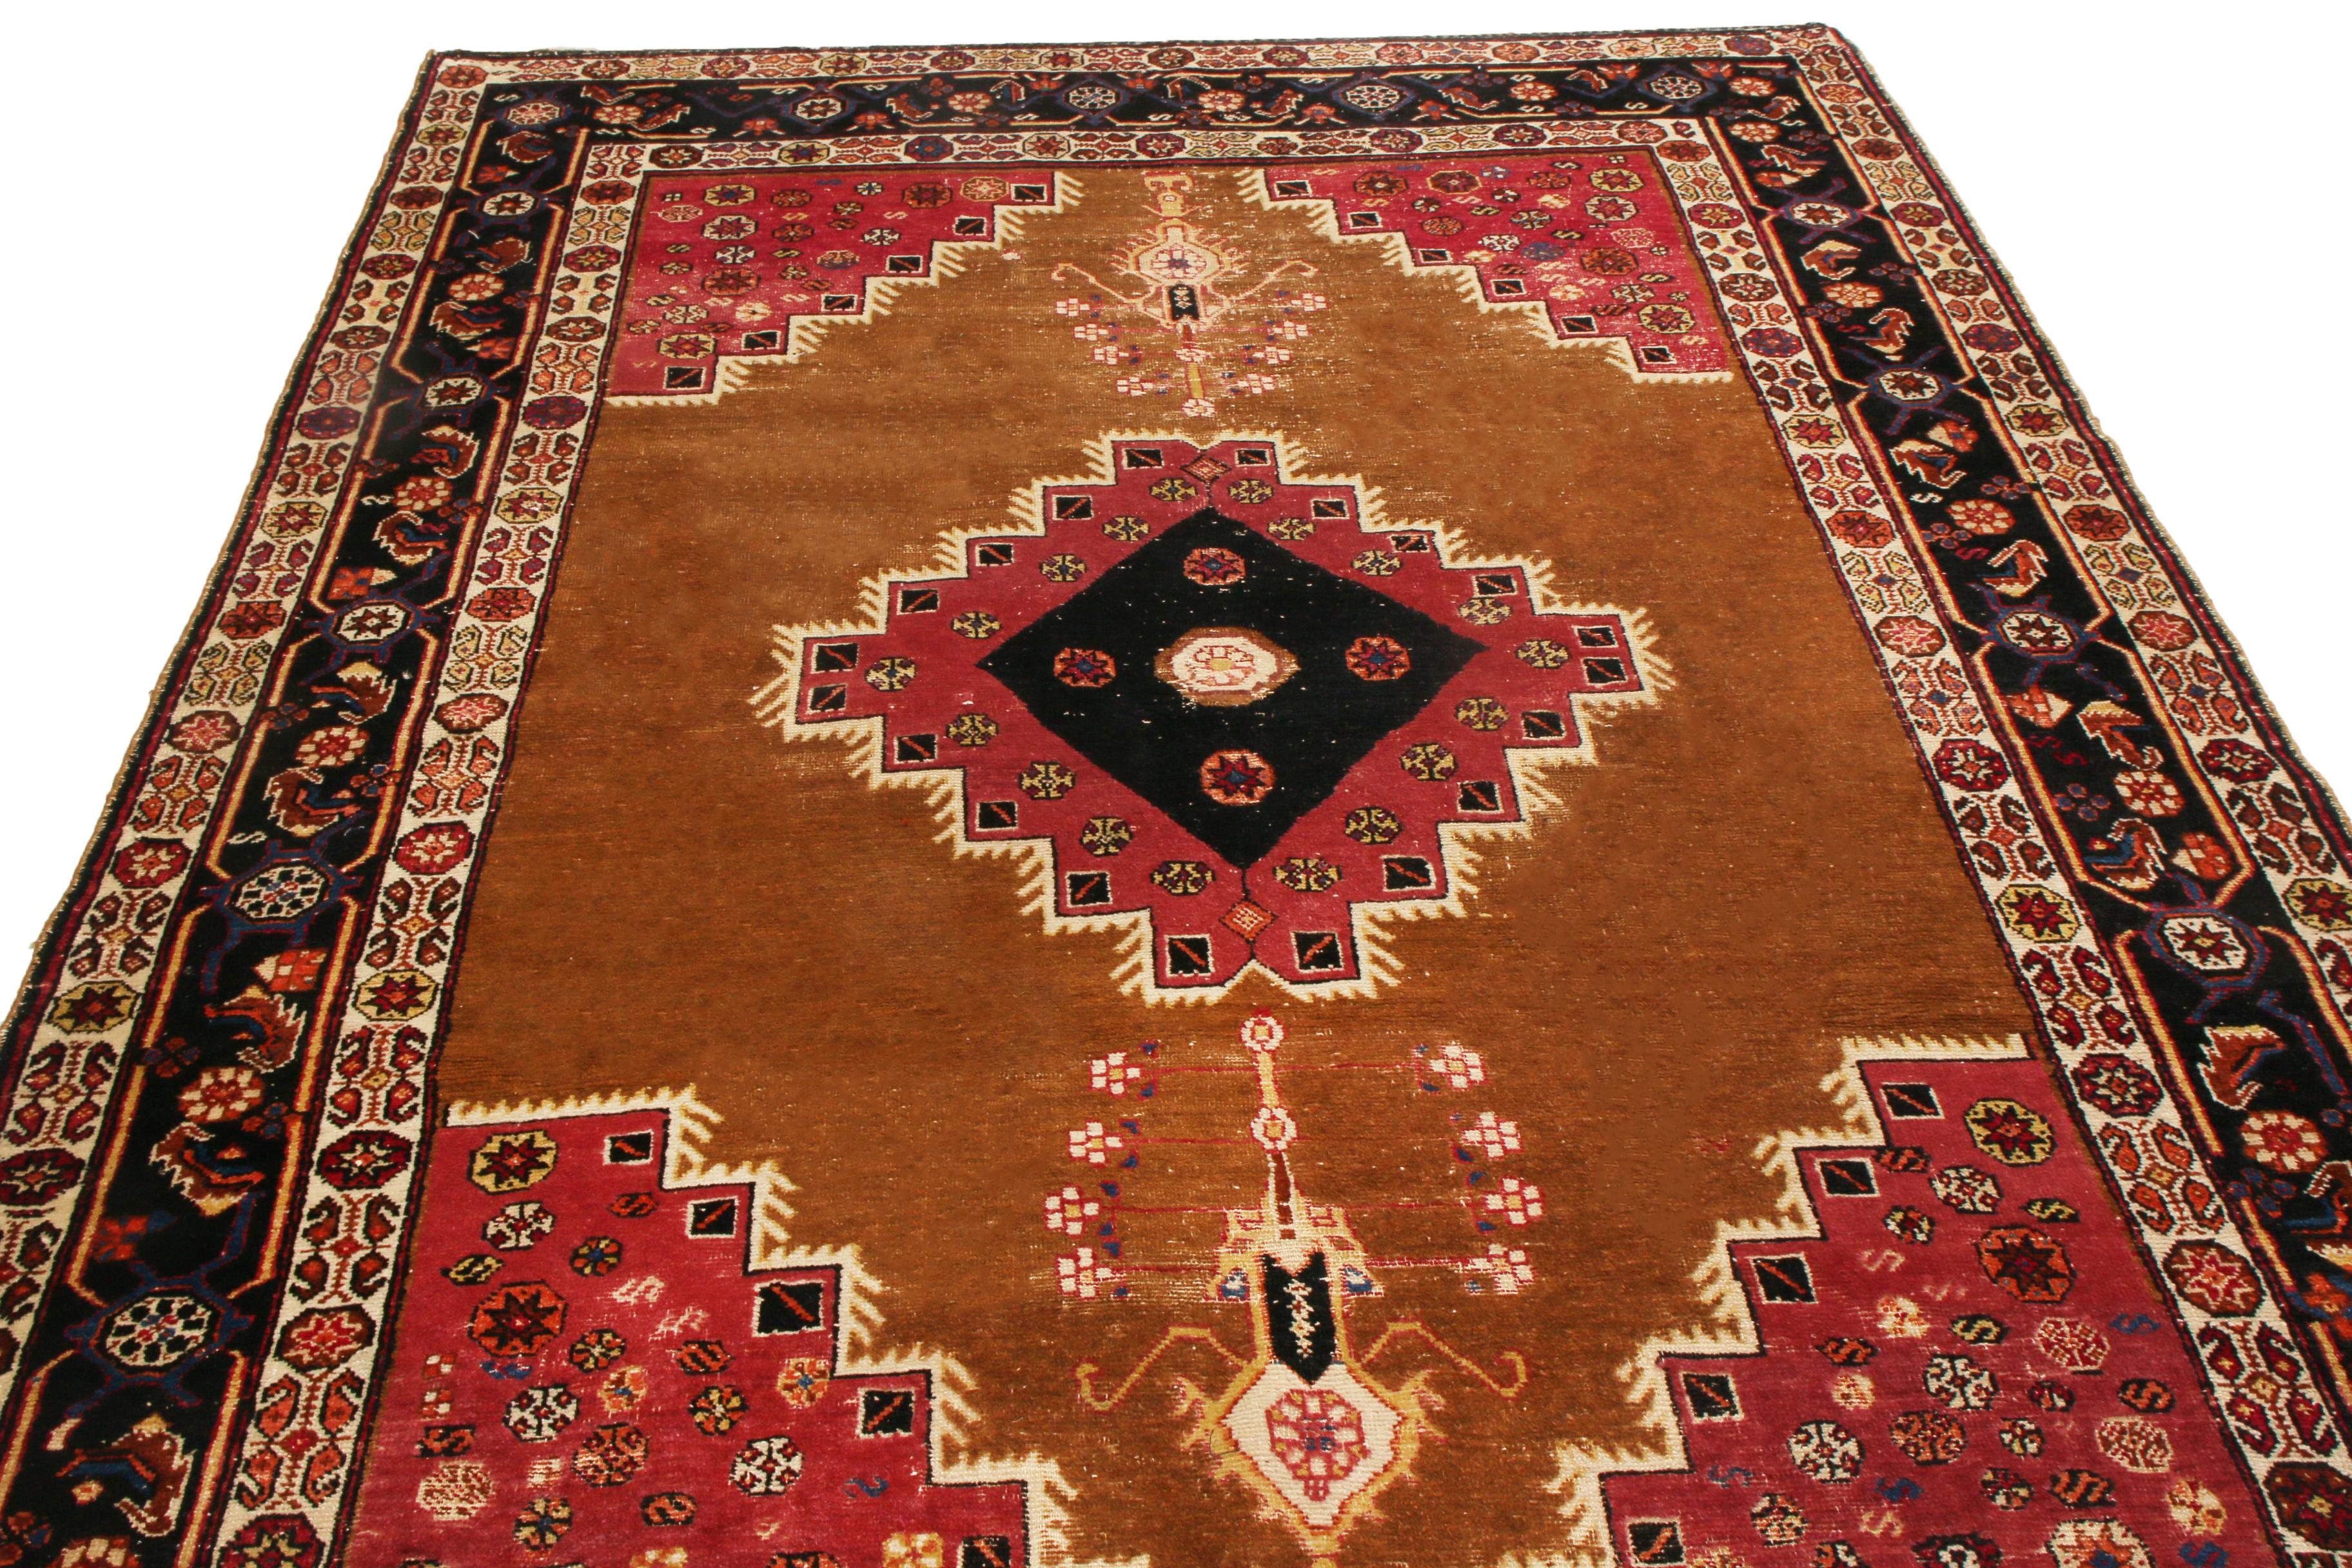 Originating from Persia in 1900, this antique transitional Bakhtiari rug hosts uncommon regal colorways with a varied series of spiritual symbols. Hand knotted in durable, quality wool, the black and maroon red medallions are emboldened against a